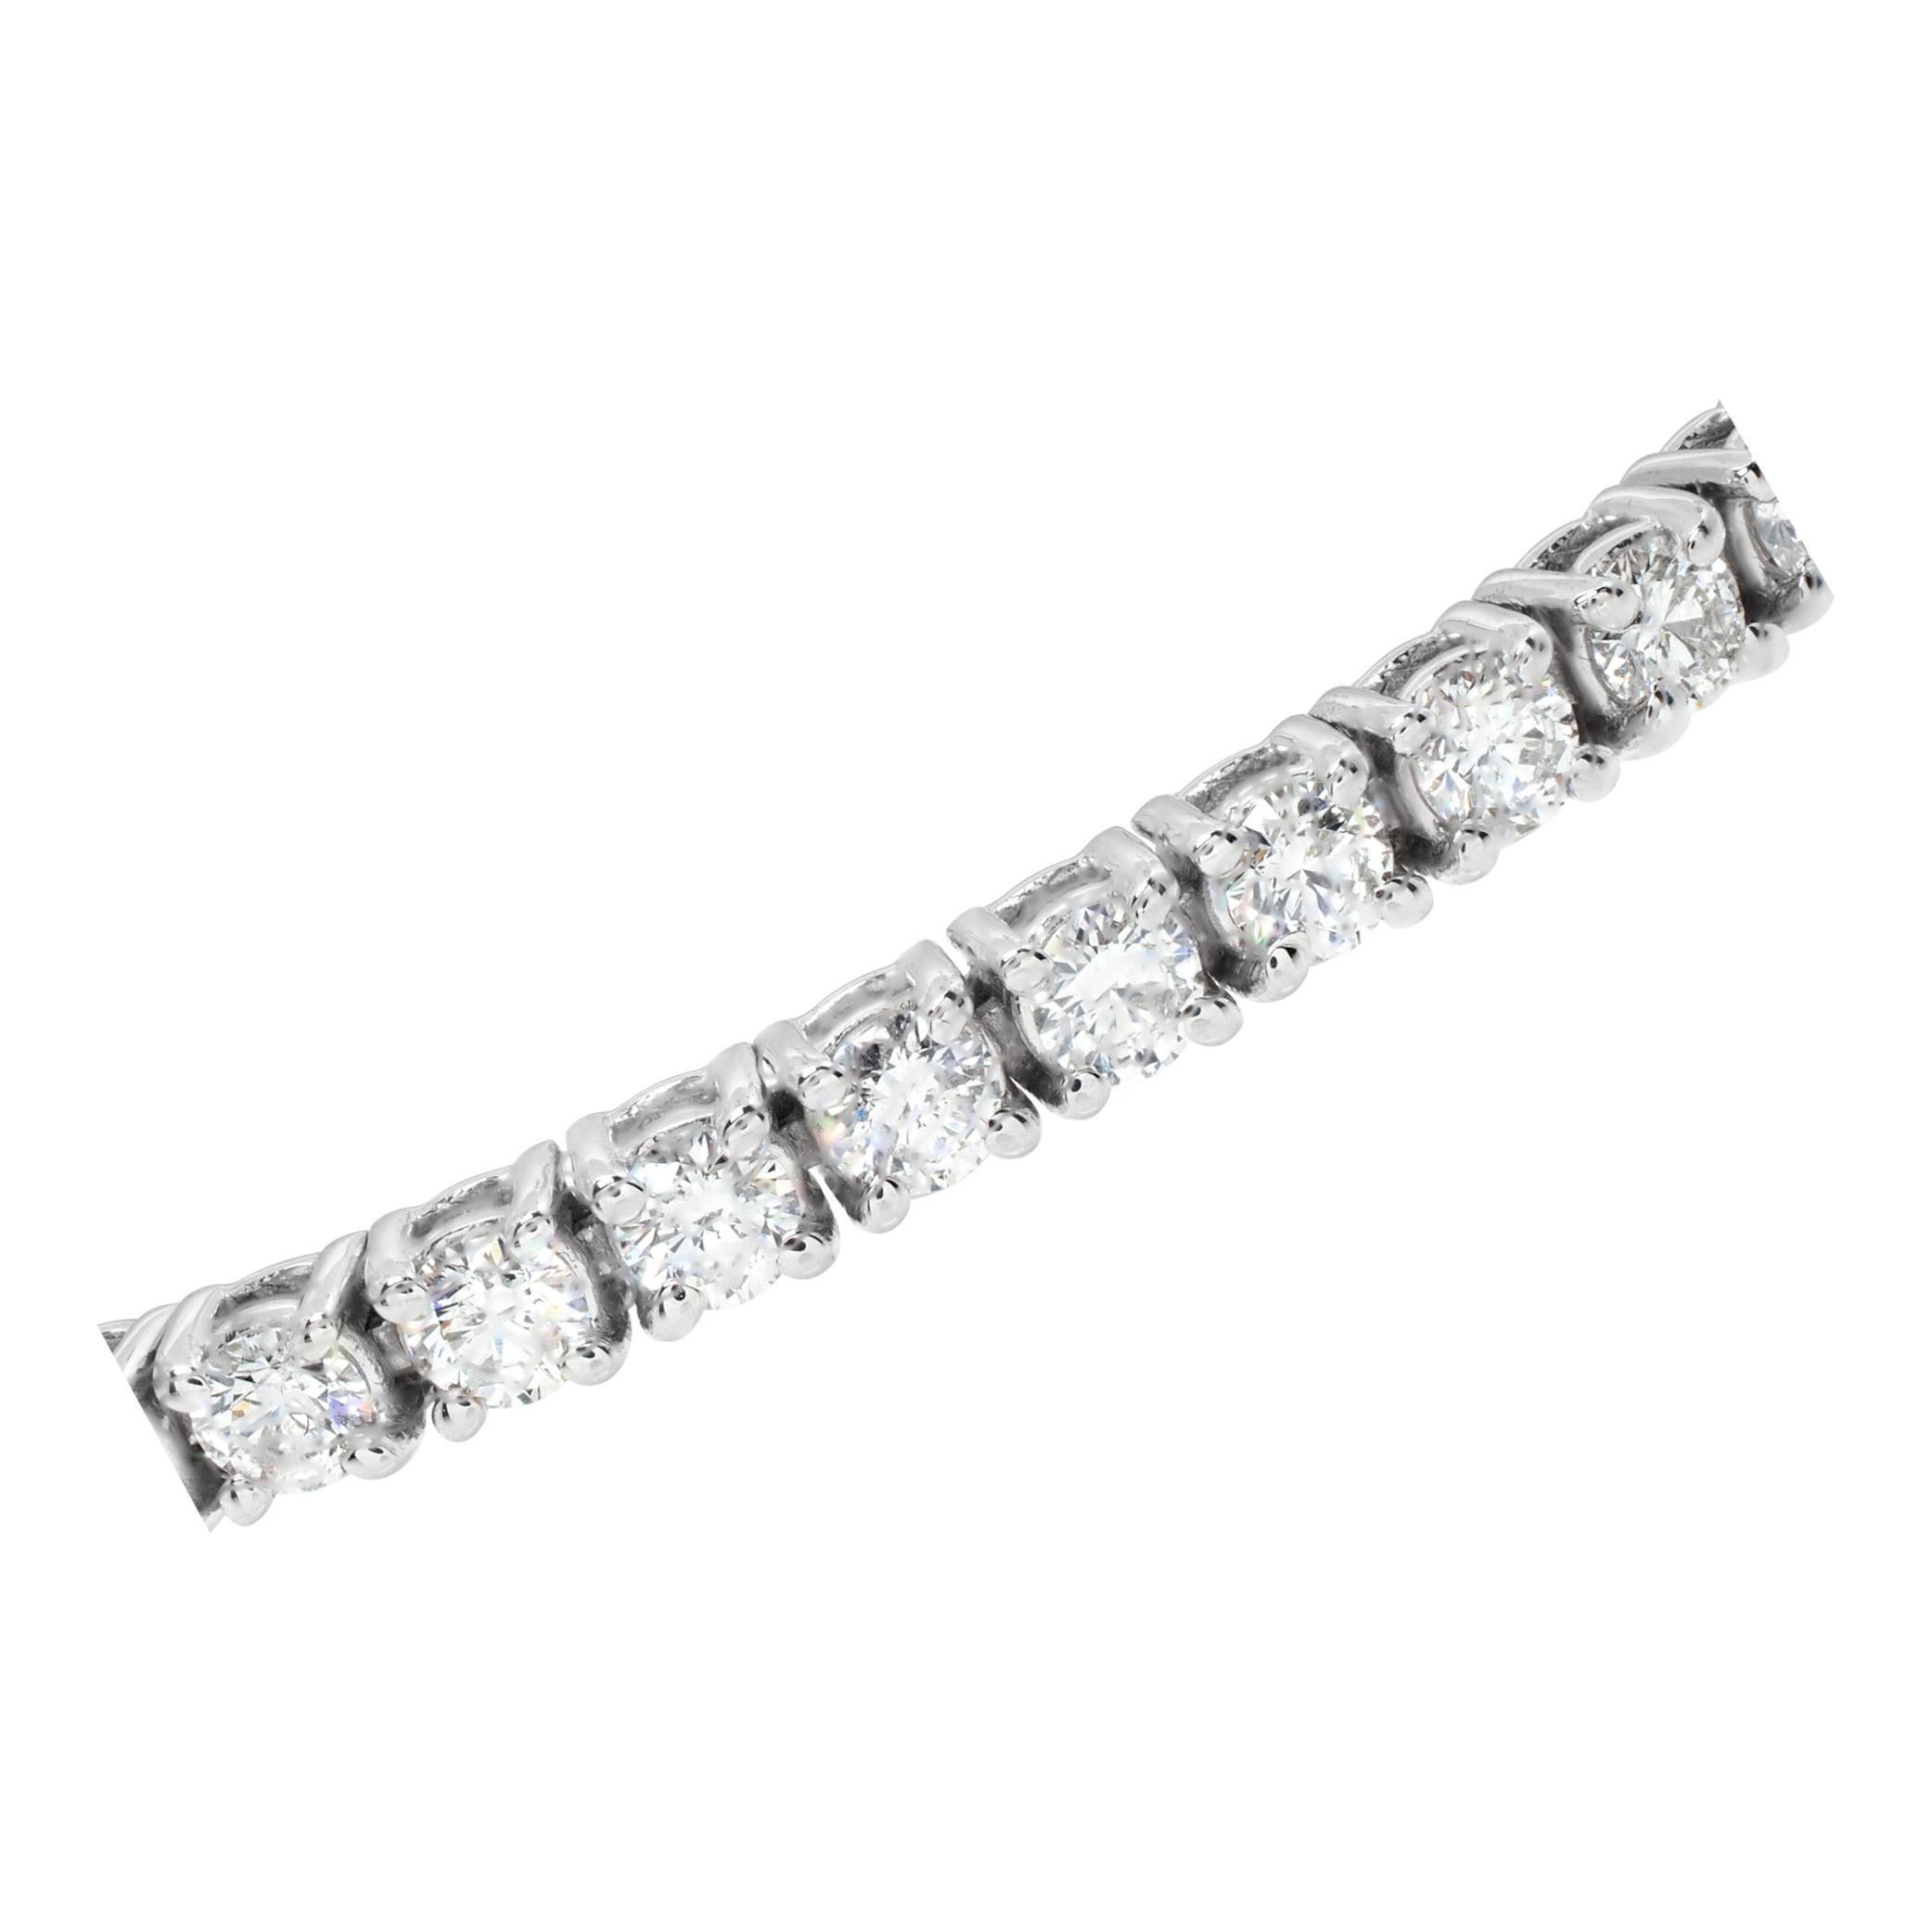 White gold diamond tennis bracelet In Excellent Condition For Sale In Surfside, FL